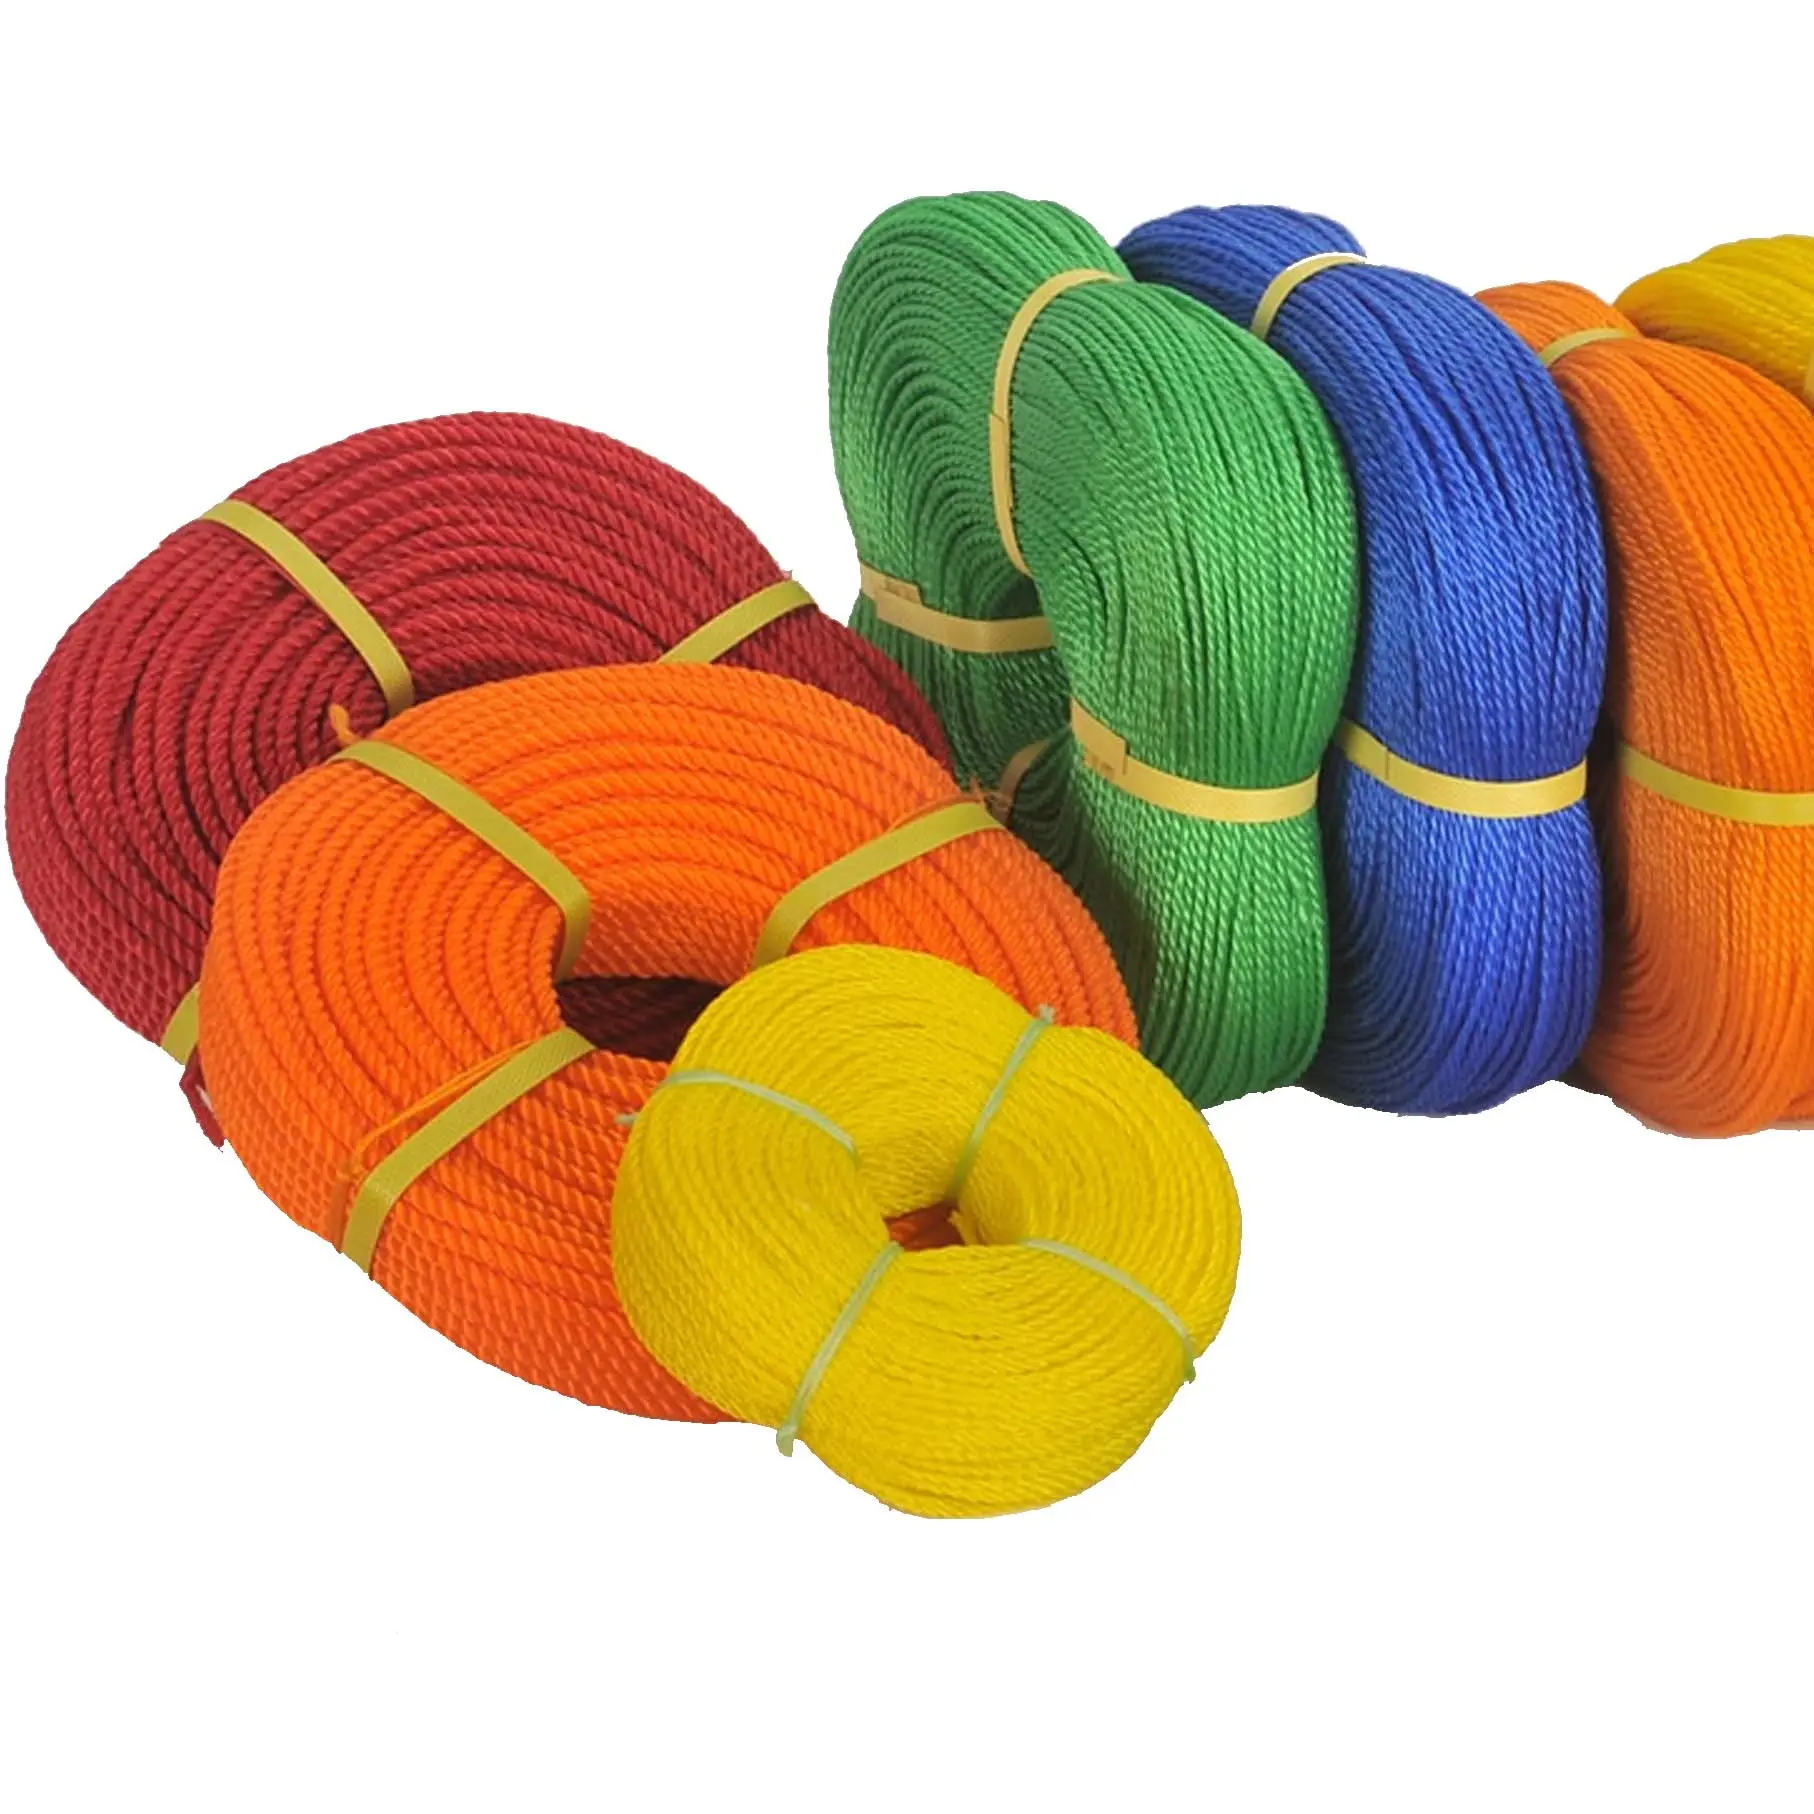 Polypropylene PP Ropes PE Ropes 4mm -32 mm high Quality Ropes For Africa Market India Factory leora polyplast Plastic Industrie